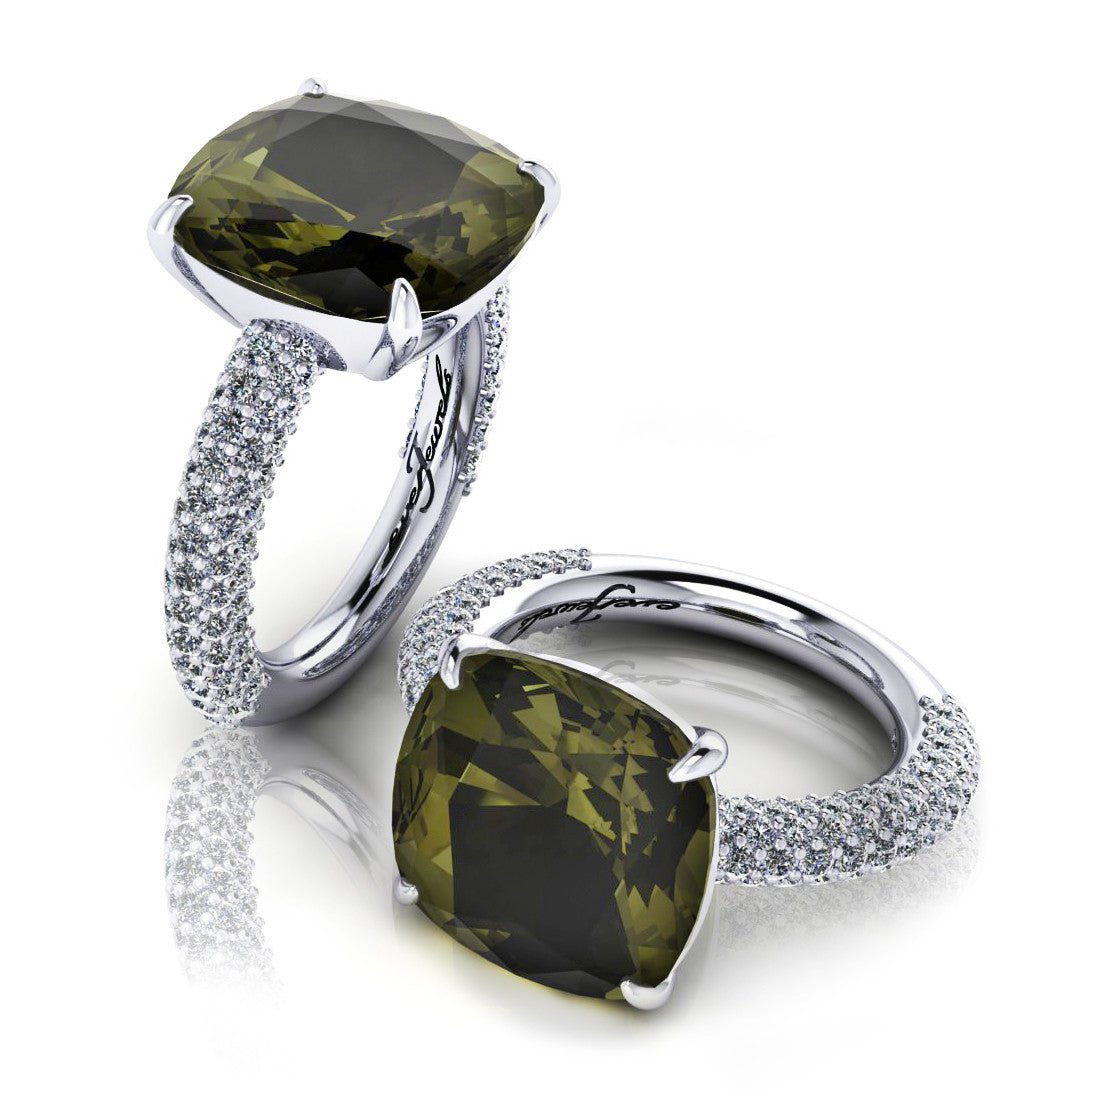 18ct White gold cushion green Tourmaline dress ring with pave diamonds - ForeverJewels Design Studio 8